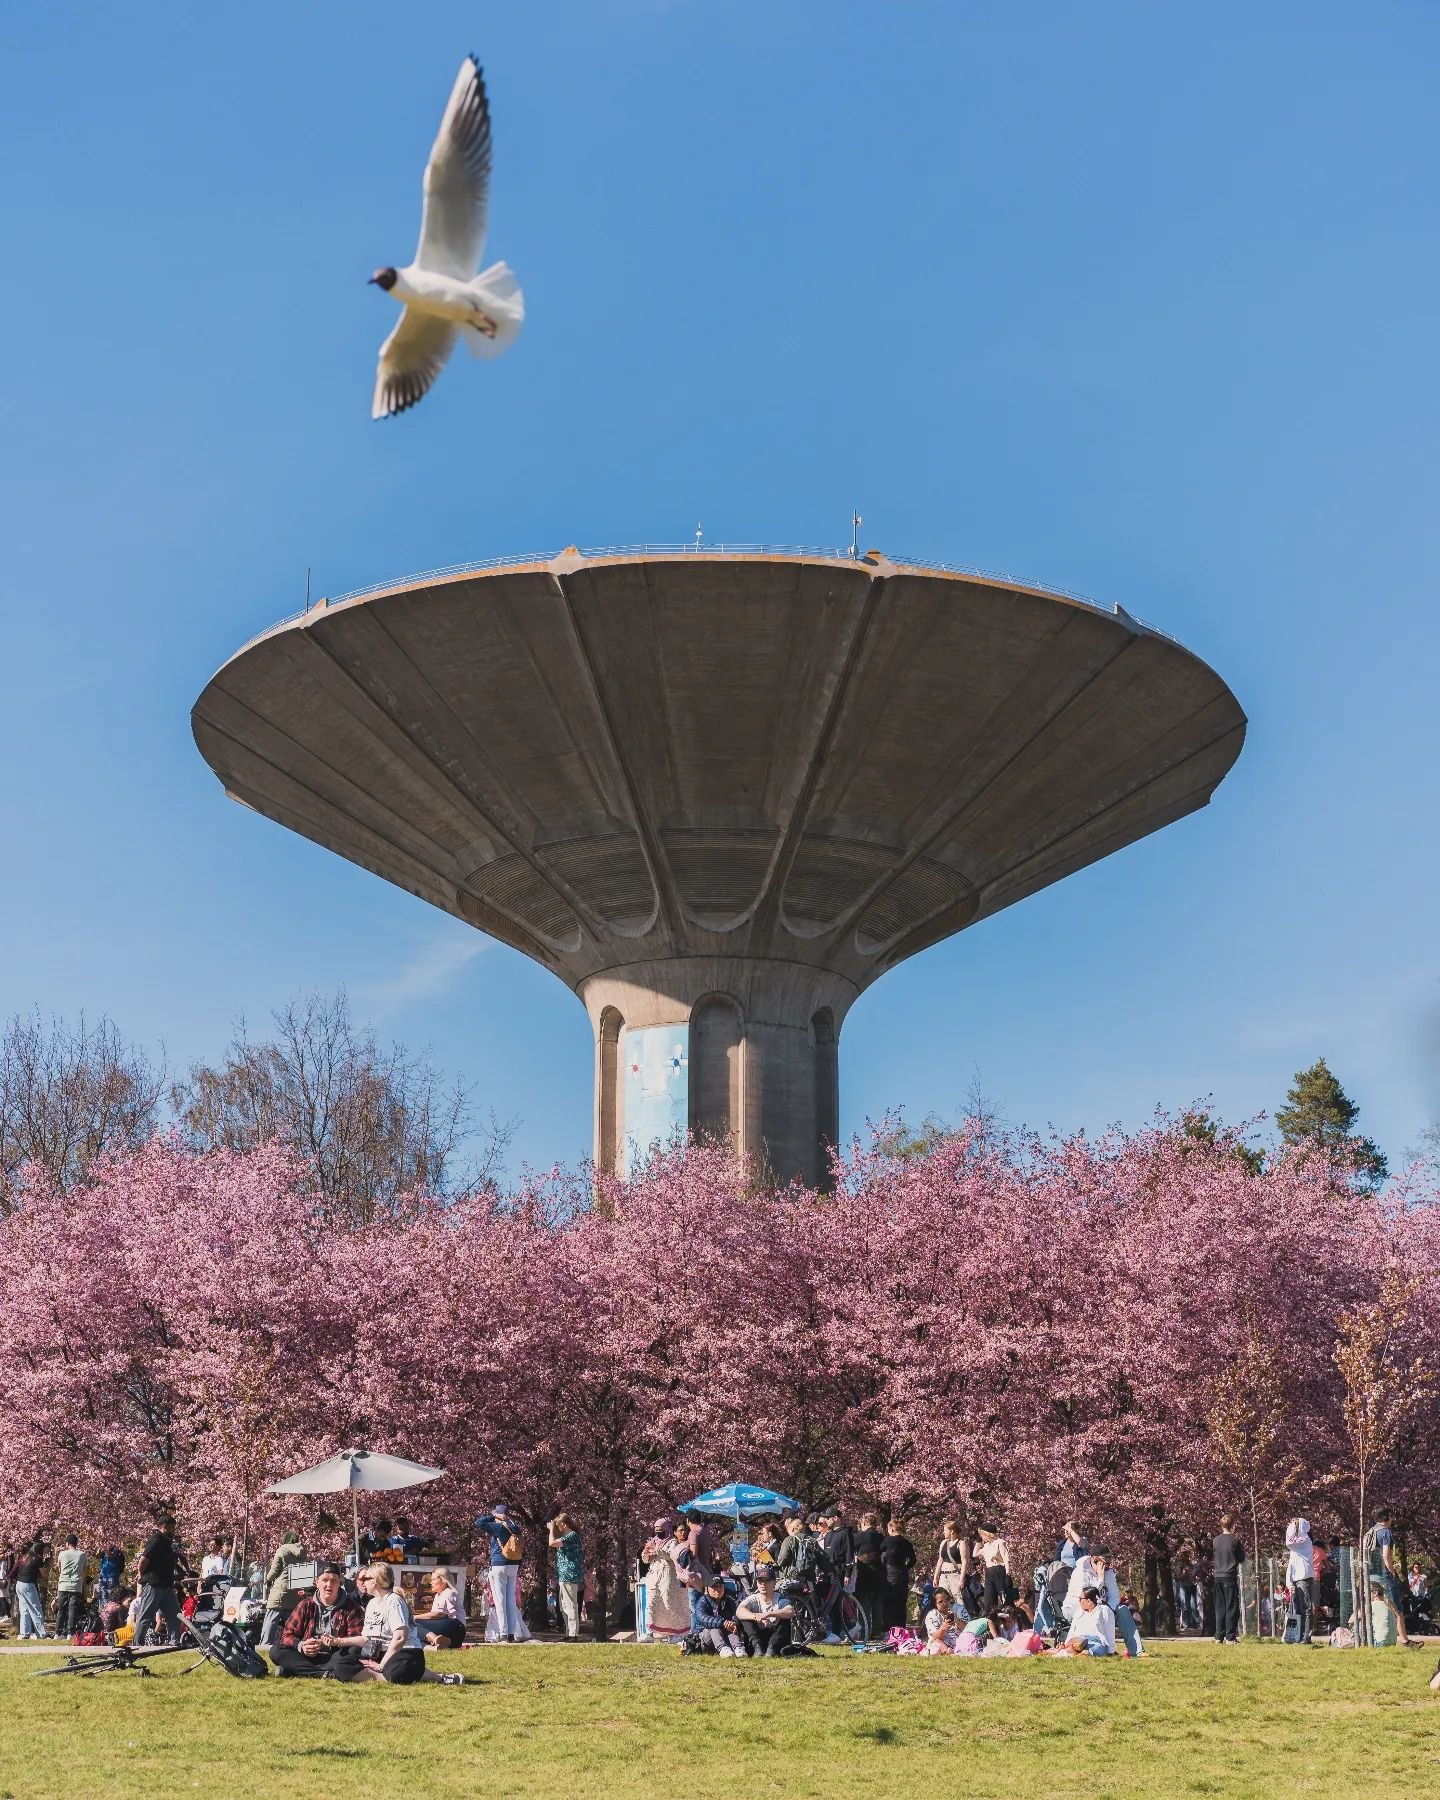 Cherry cherry ft. Steven the Seagull! 🌸🕊 Now is the time to go see the cherry blossoms in Roihuvuori cherry tree park if you are in Helsinki! Have you already been there? 💁🏻&zwj;♂️ #roihuvuorenkirsikkapuisto #cherryblossom #helsinki